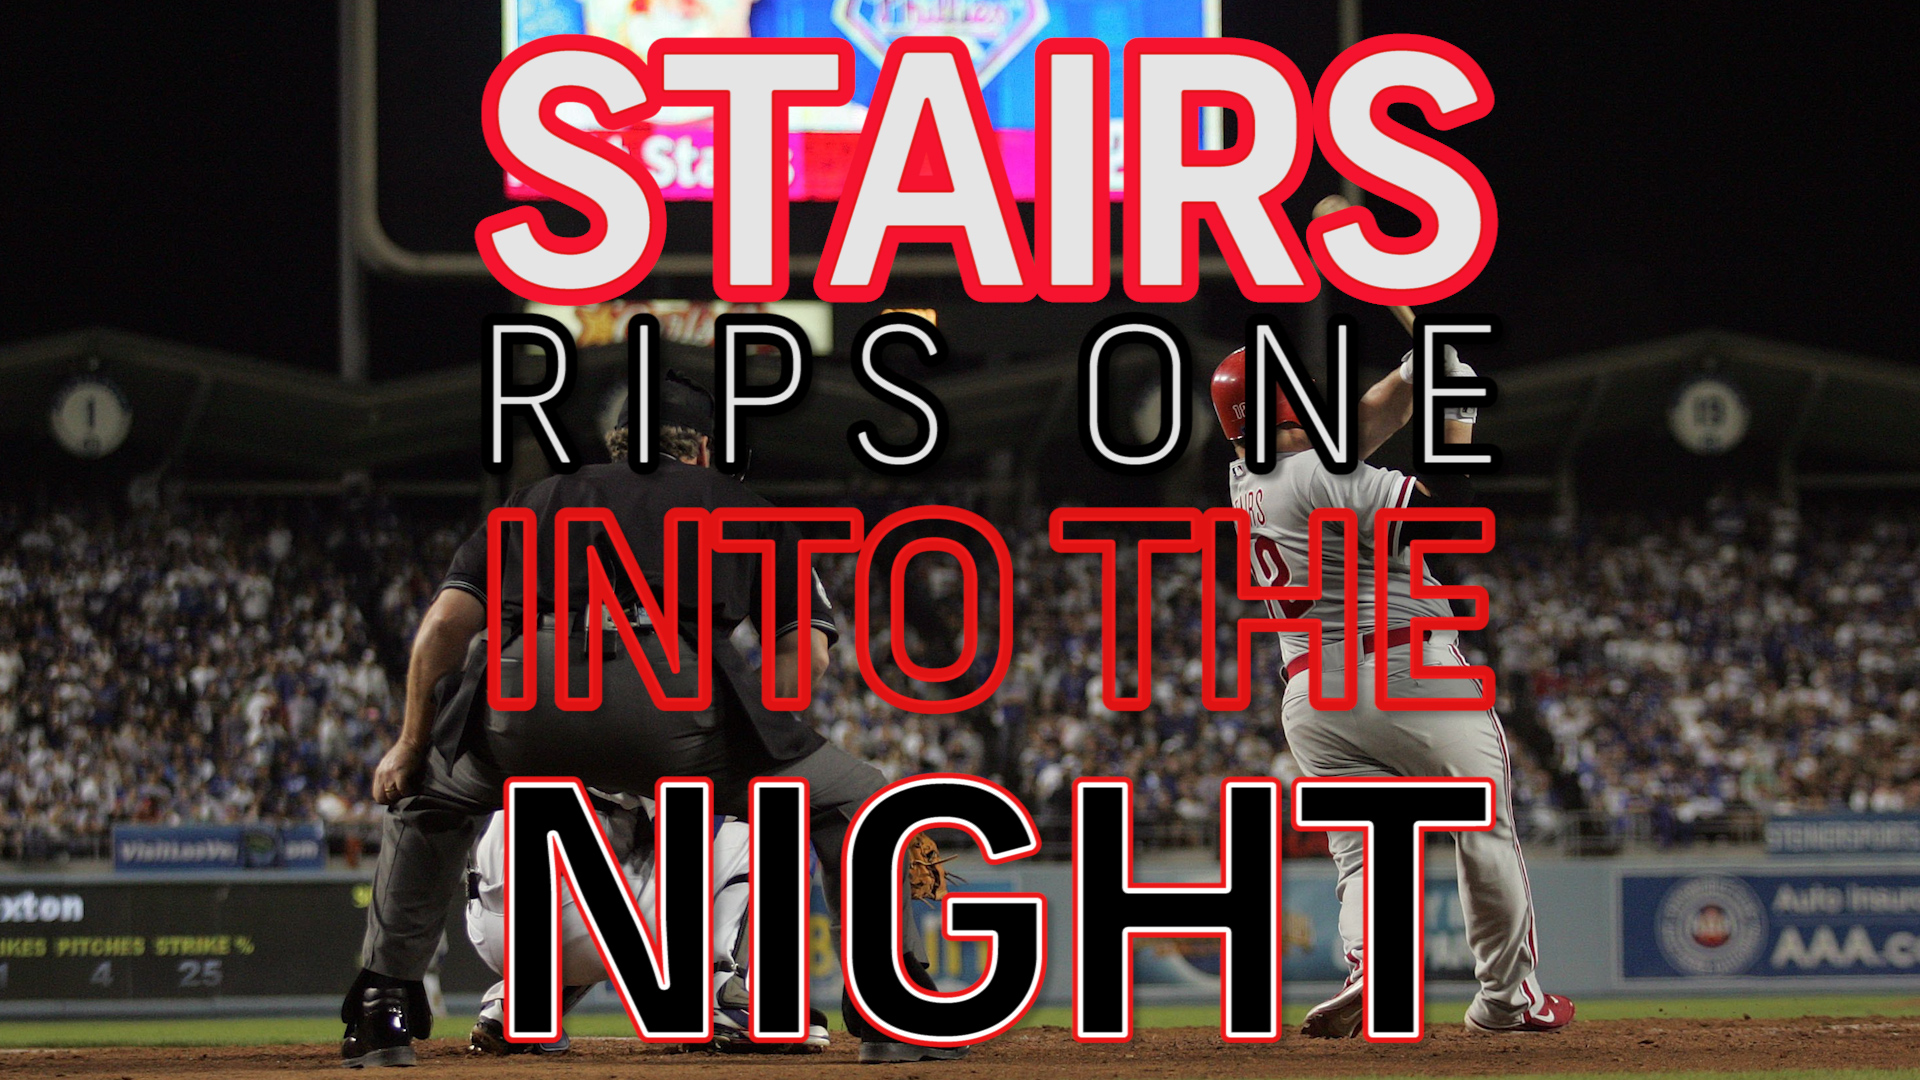 Stairs RIPS one into the night 